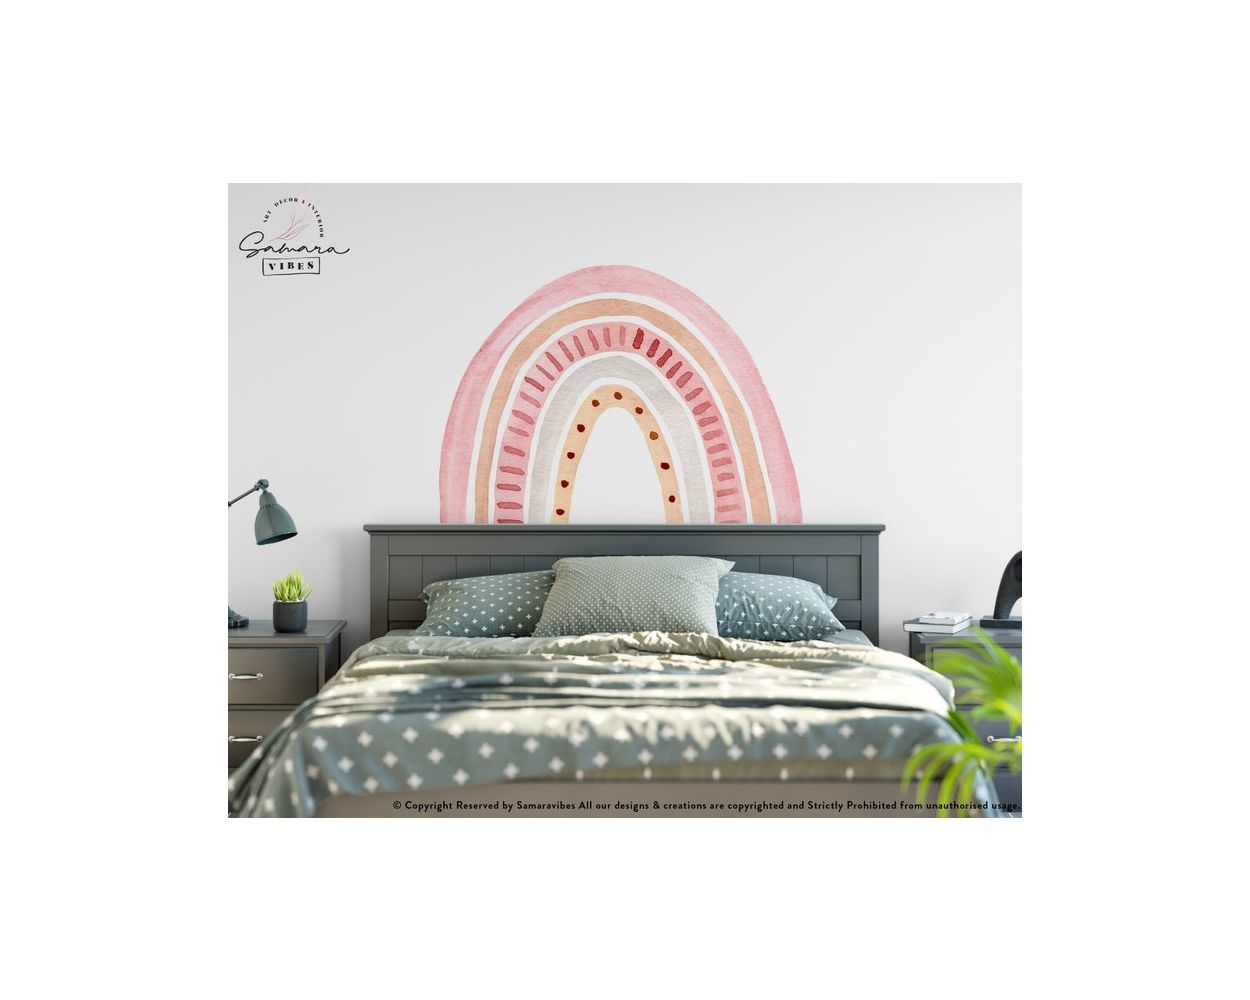 Best Rainbow Wall Stickers for Kids' Bedroom Wall Decor